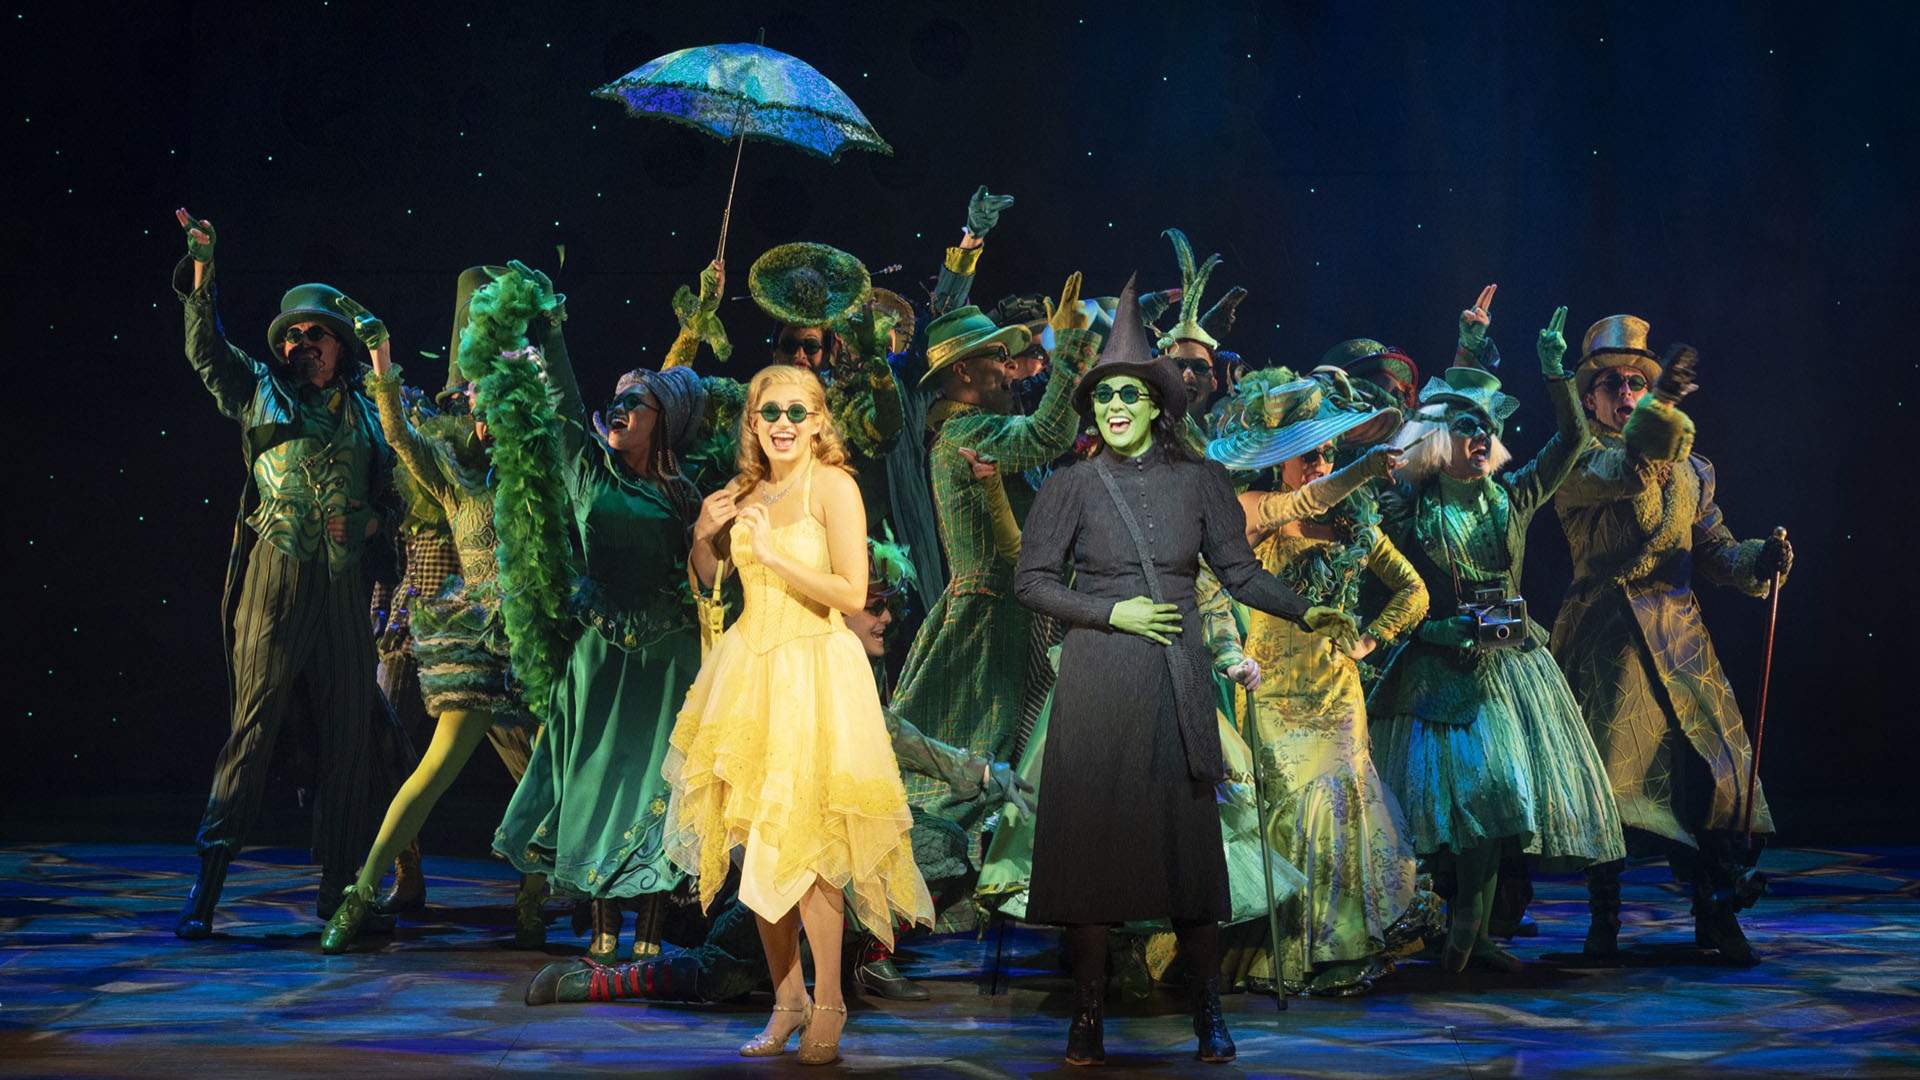 'Wicked' Is Starting Its Melbourne Season with $20 Tickets for a One-Night-Only Preview Performance